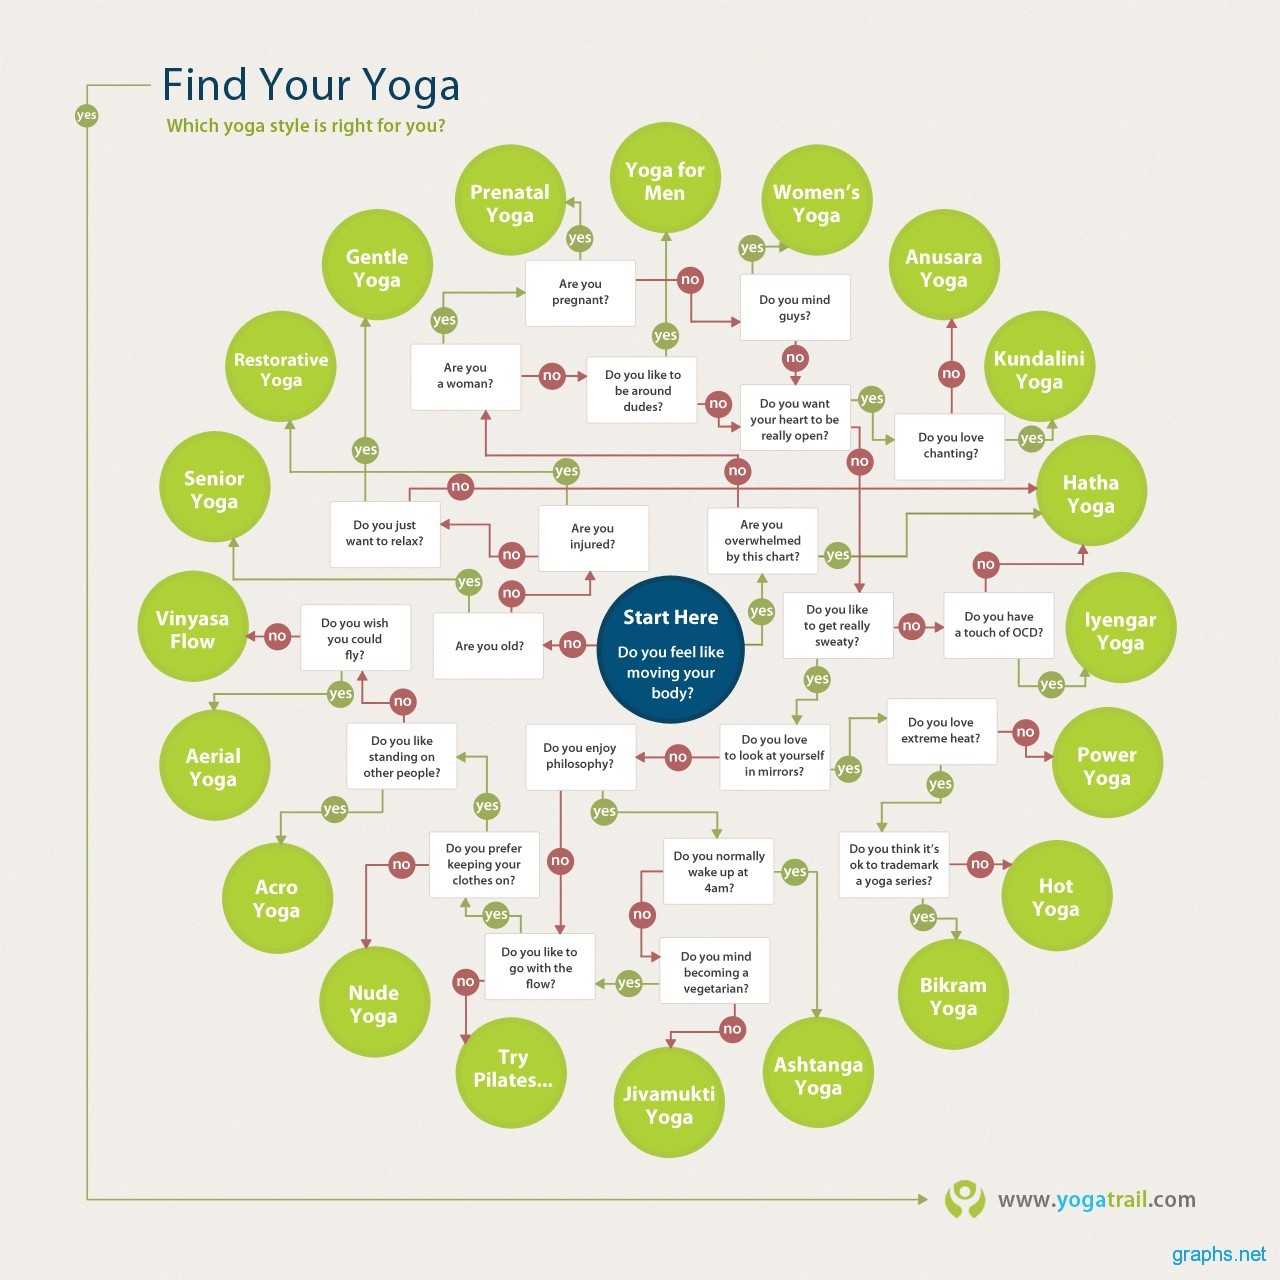 Which Yoga Style is Right for You?